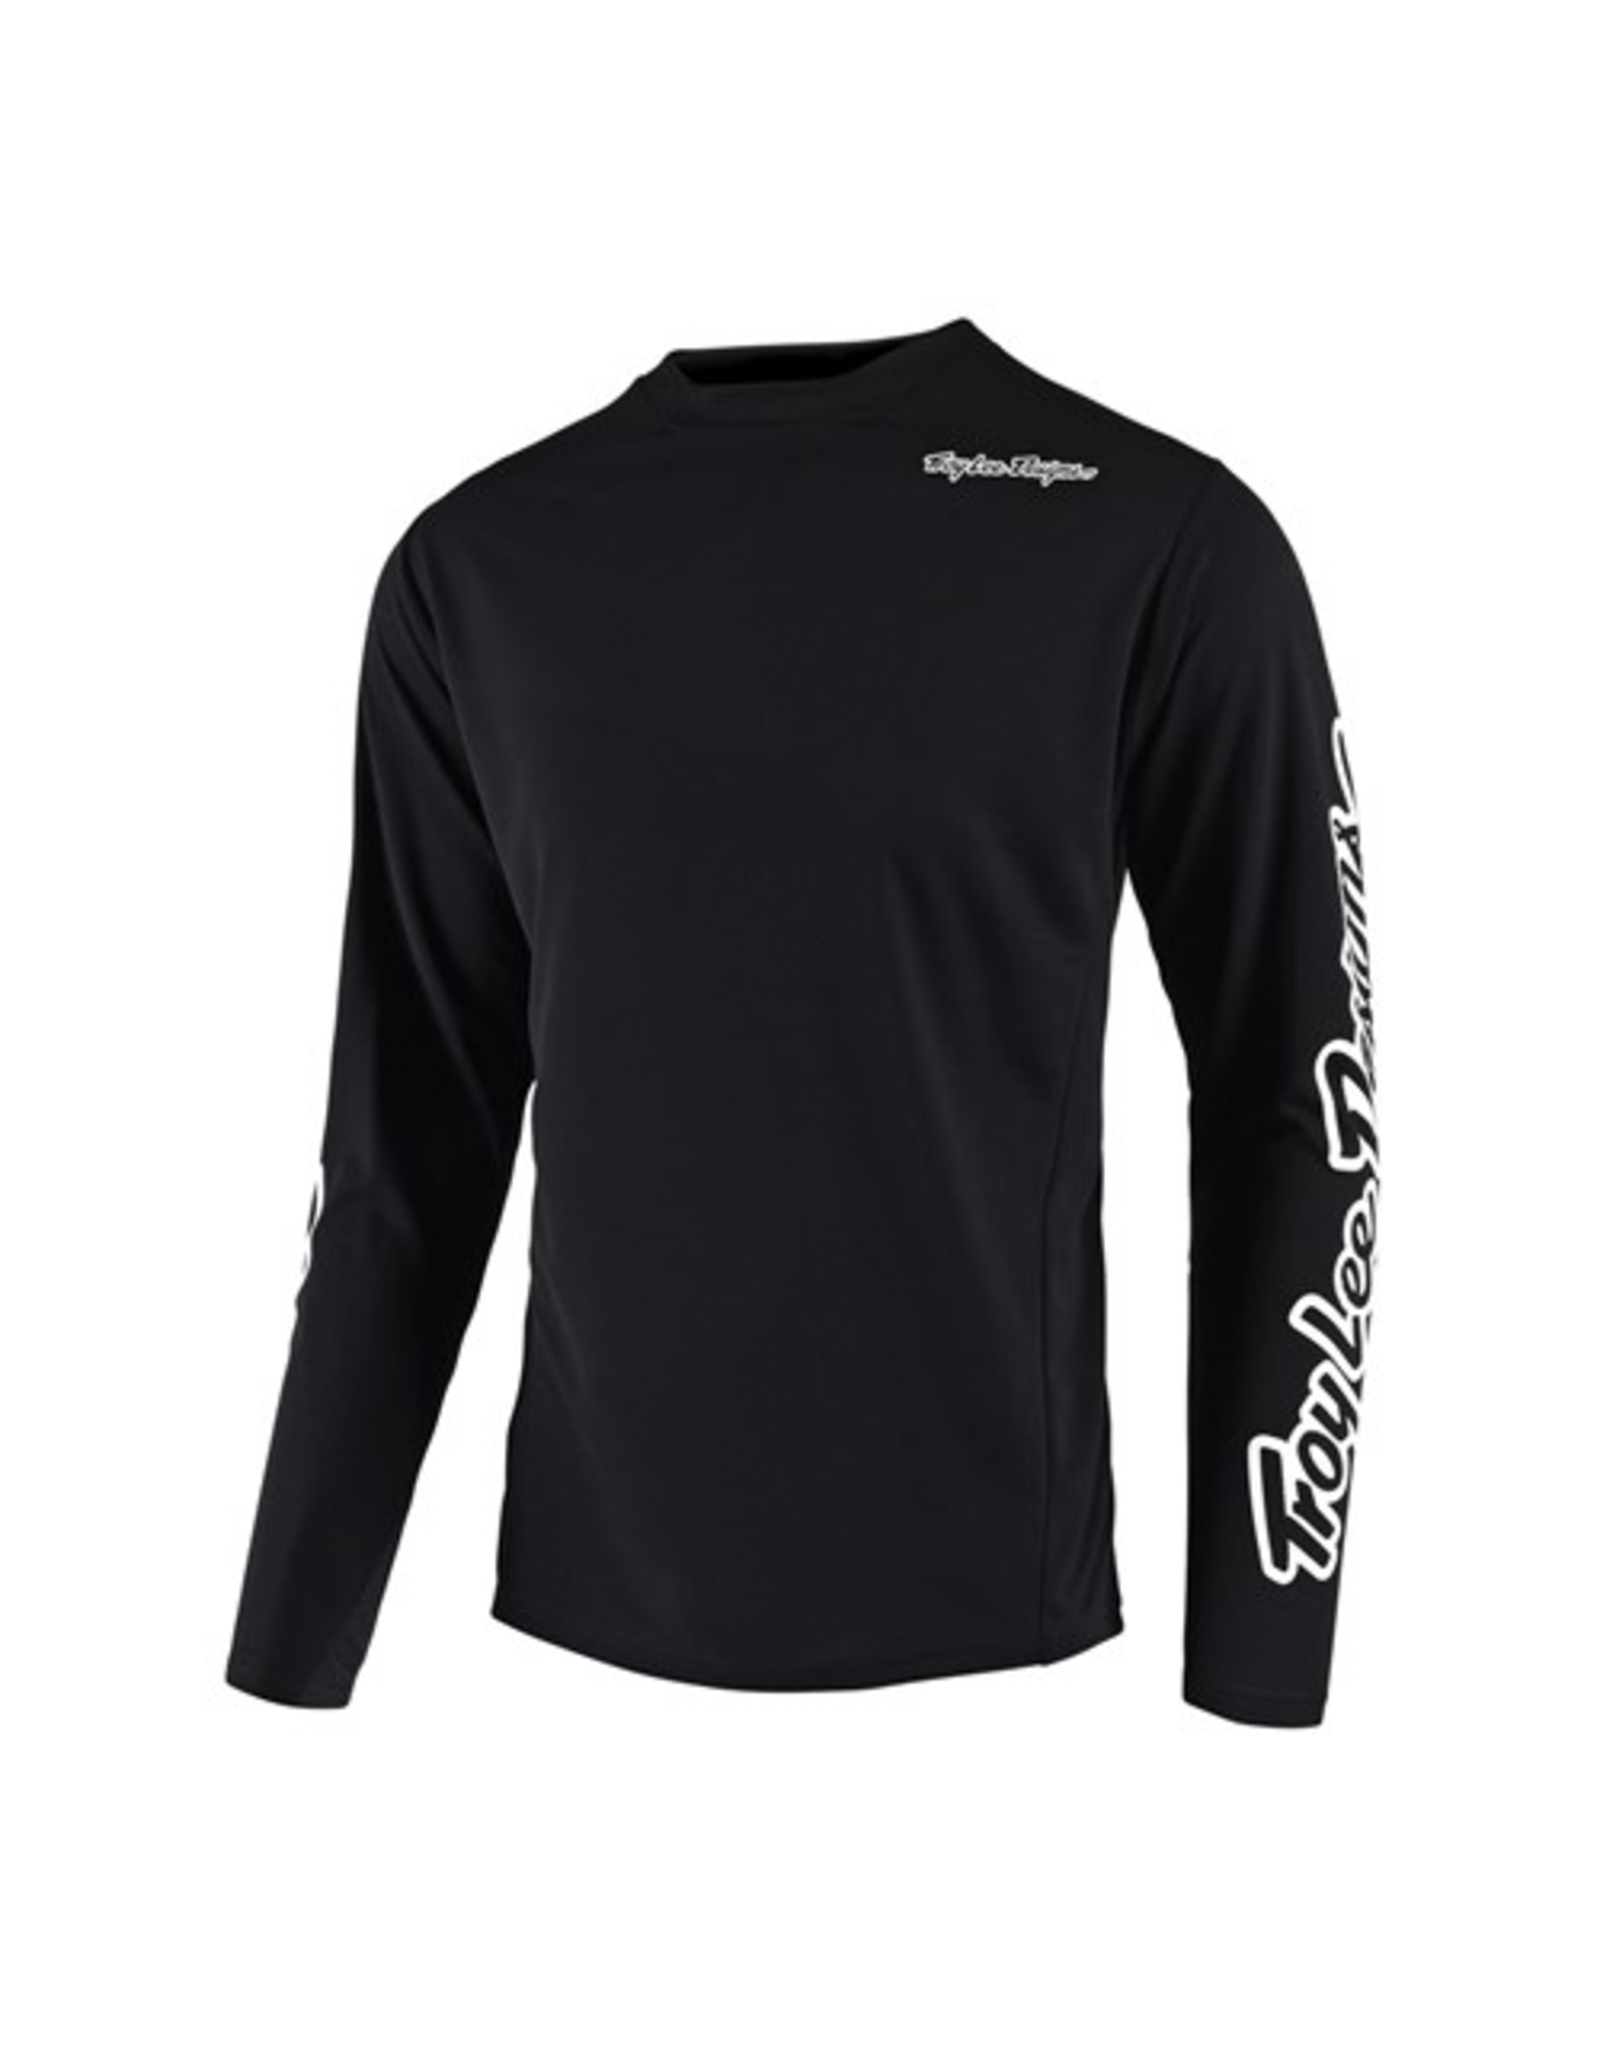 TROY LEE DESIGNS TROY LEE DESIGNS YOUTH 23 SPRINT LS JERSEY